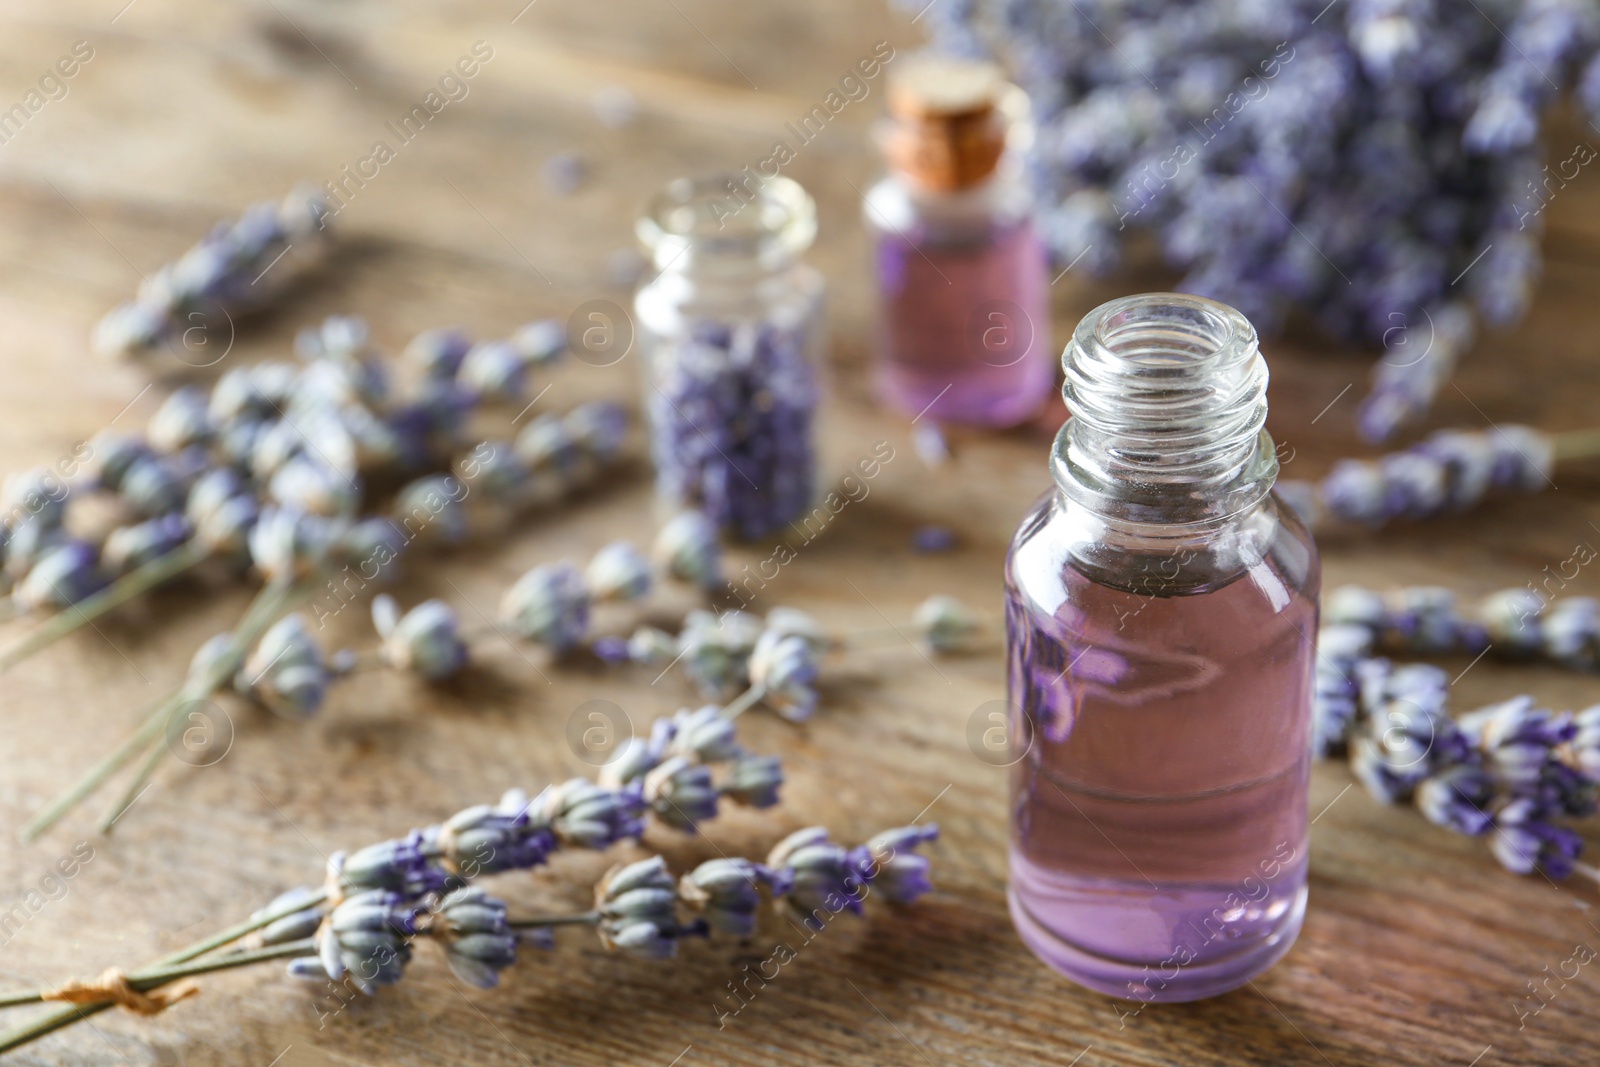 Photo of Bottle of natural essential oil and lavender flowers on wooden background